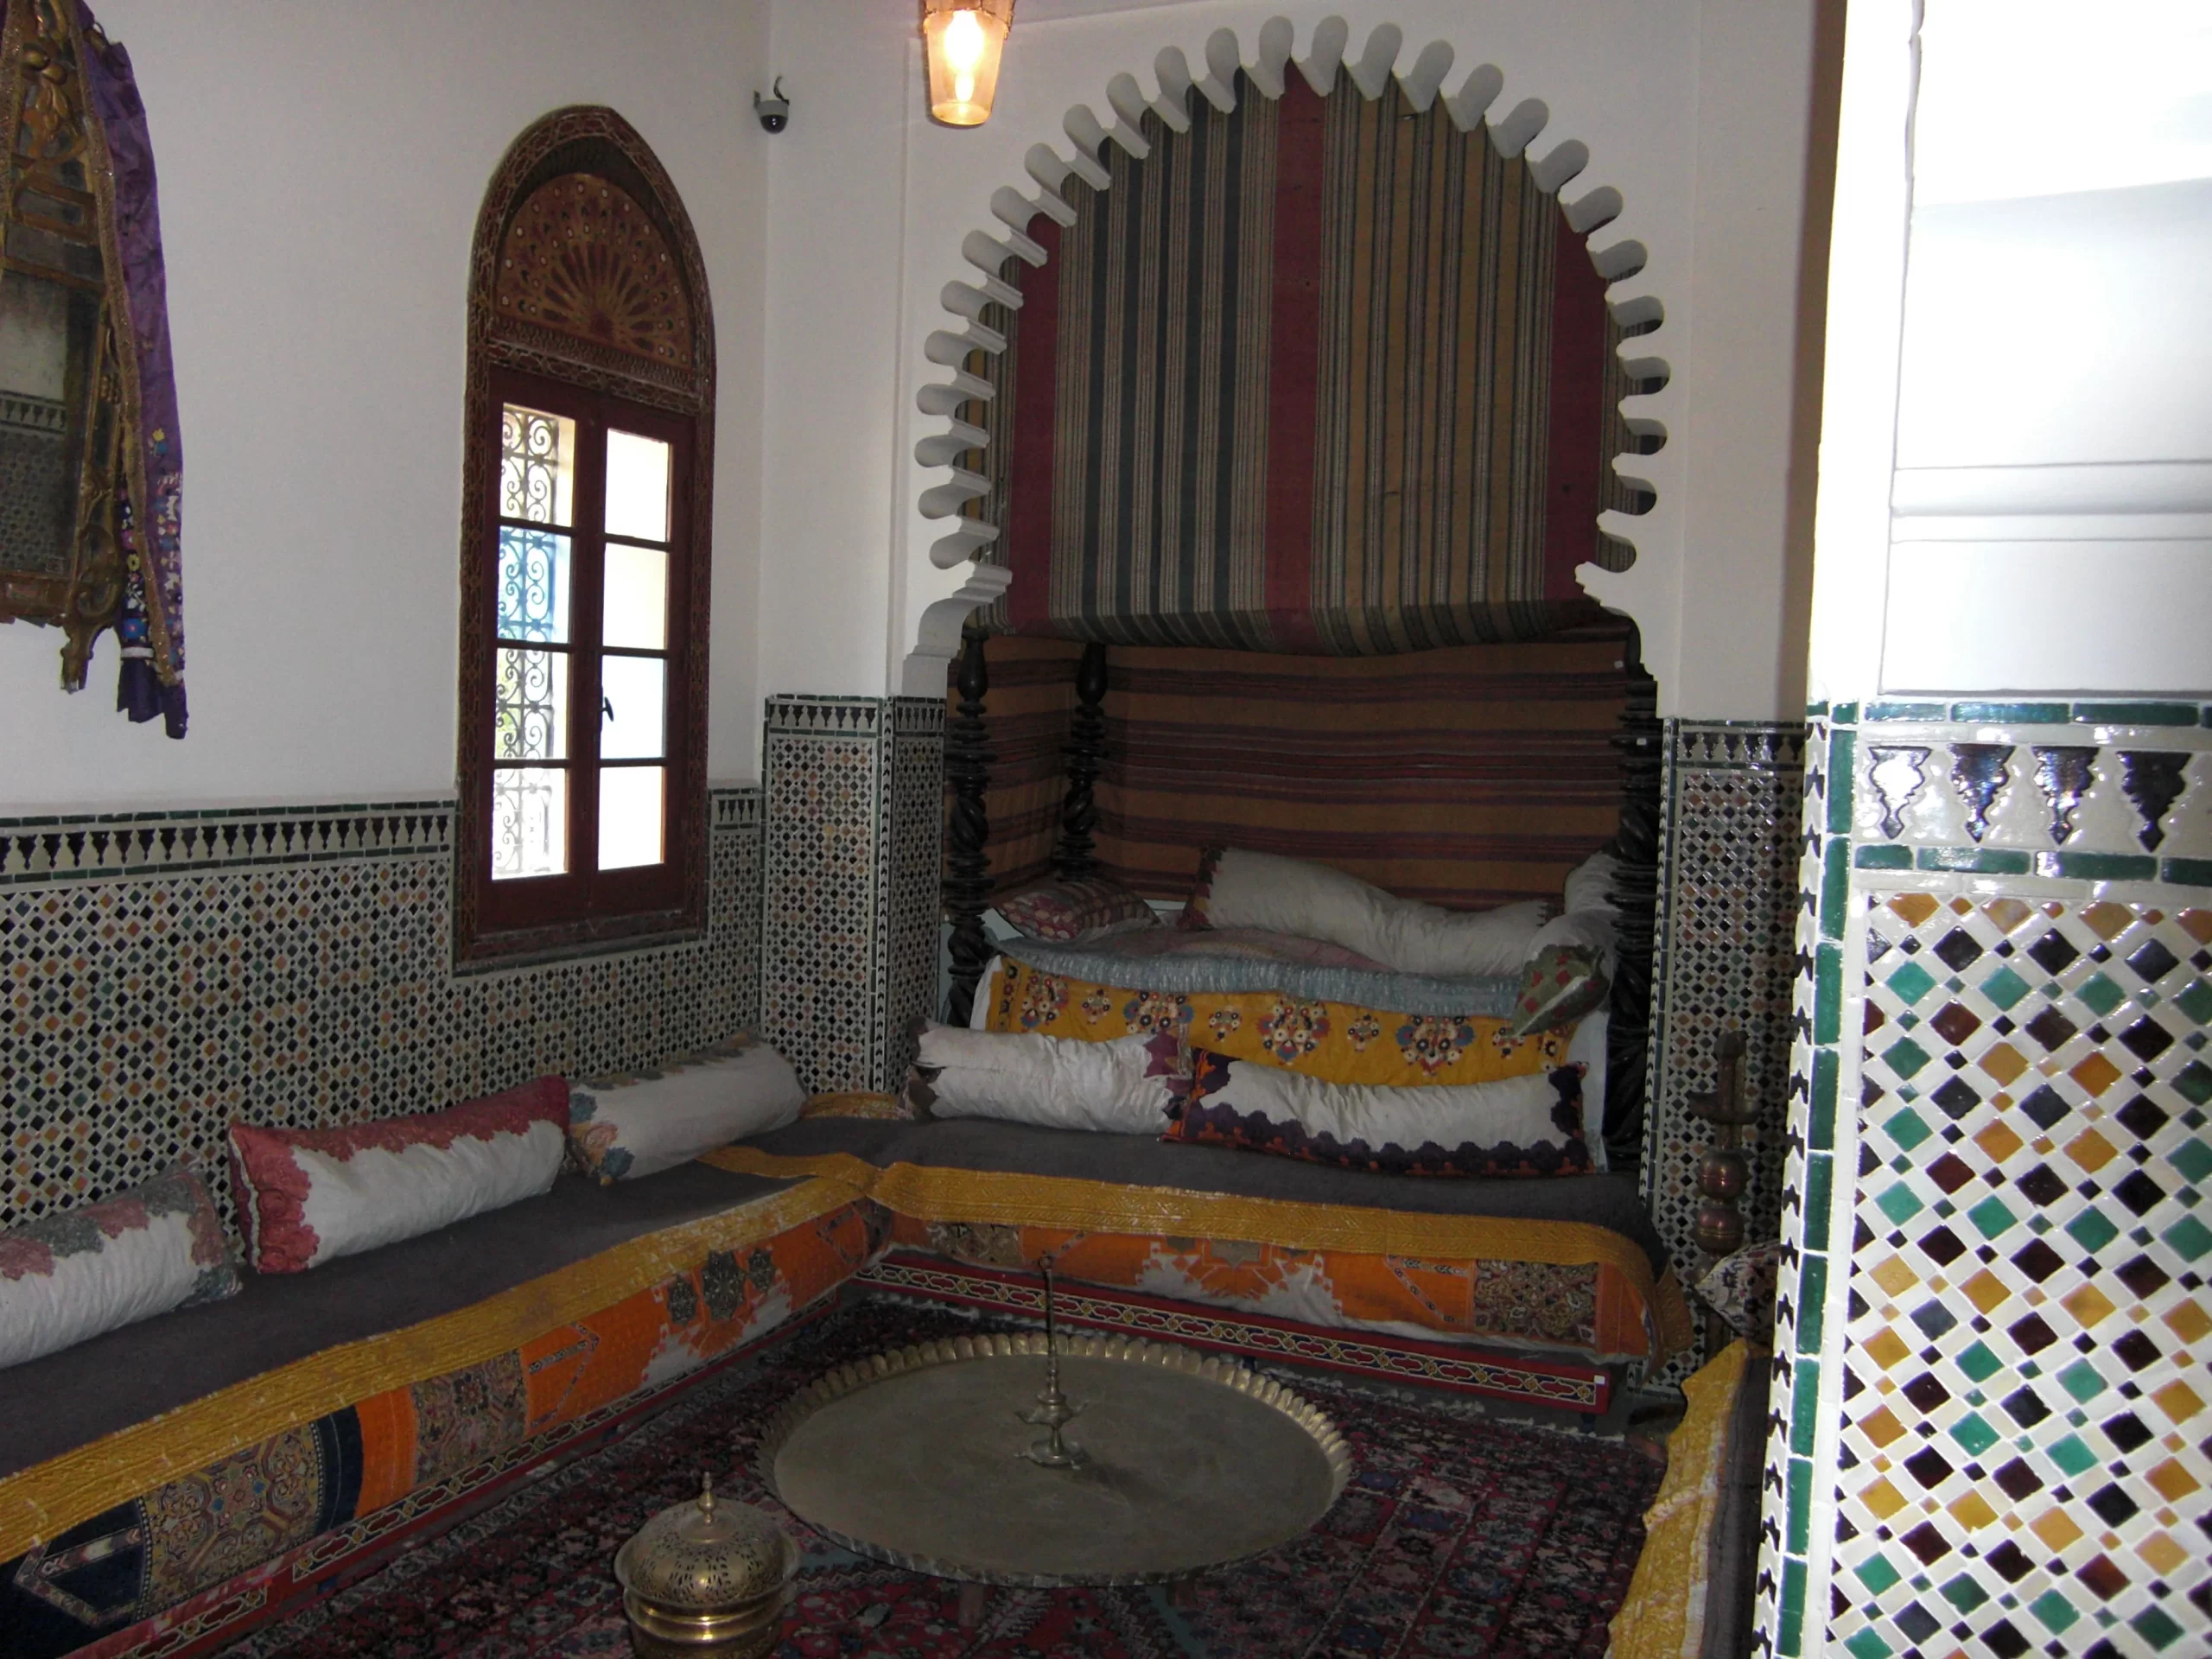 A captivating journey through the diverse traditions, history, and artifacts of Tetouan, Morocco.